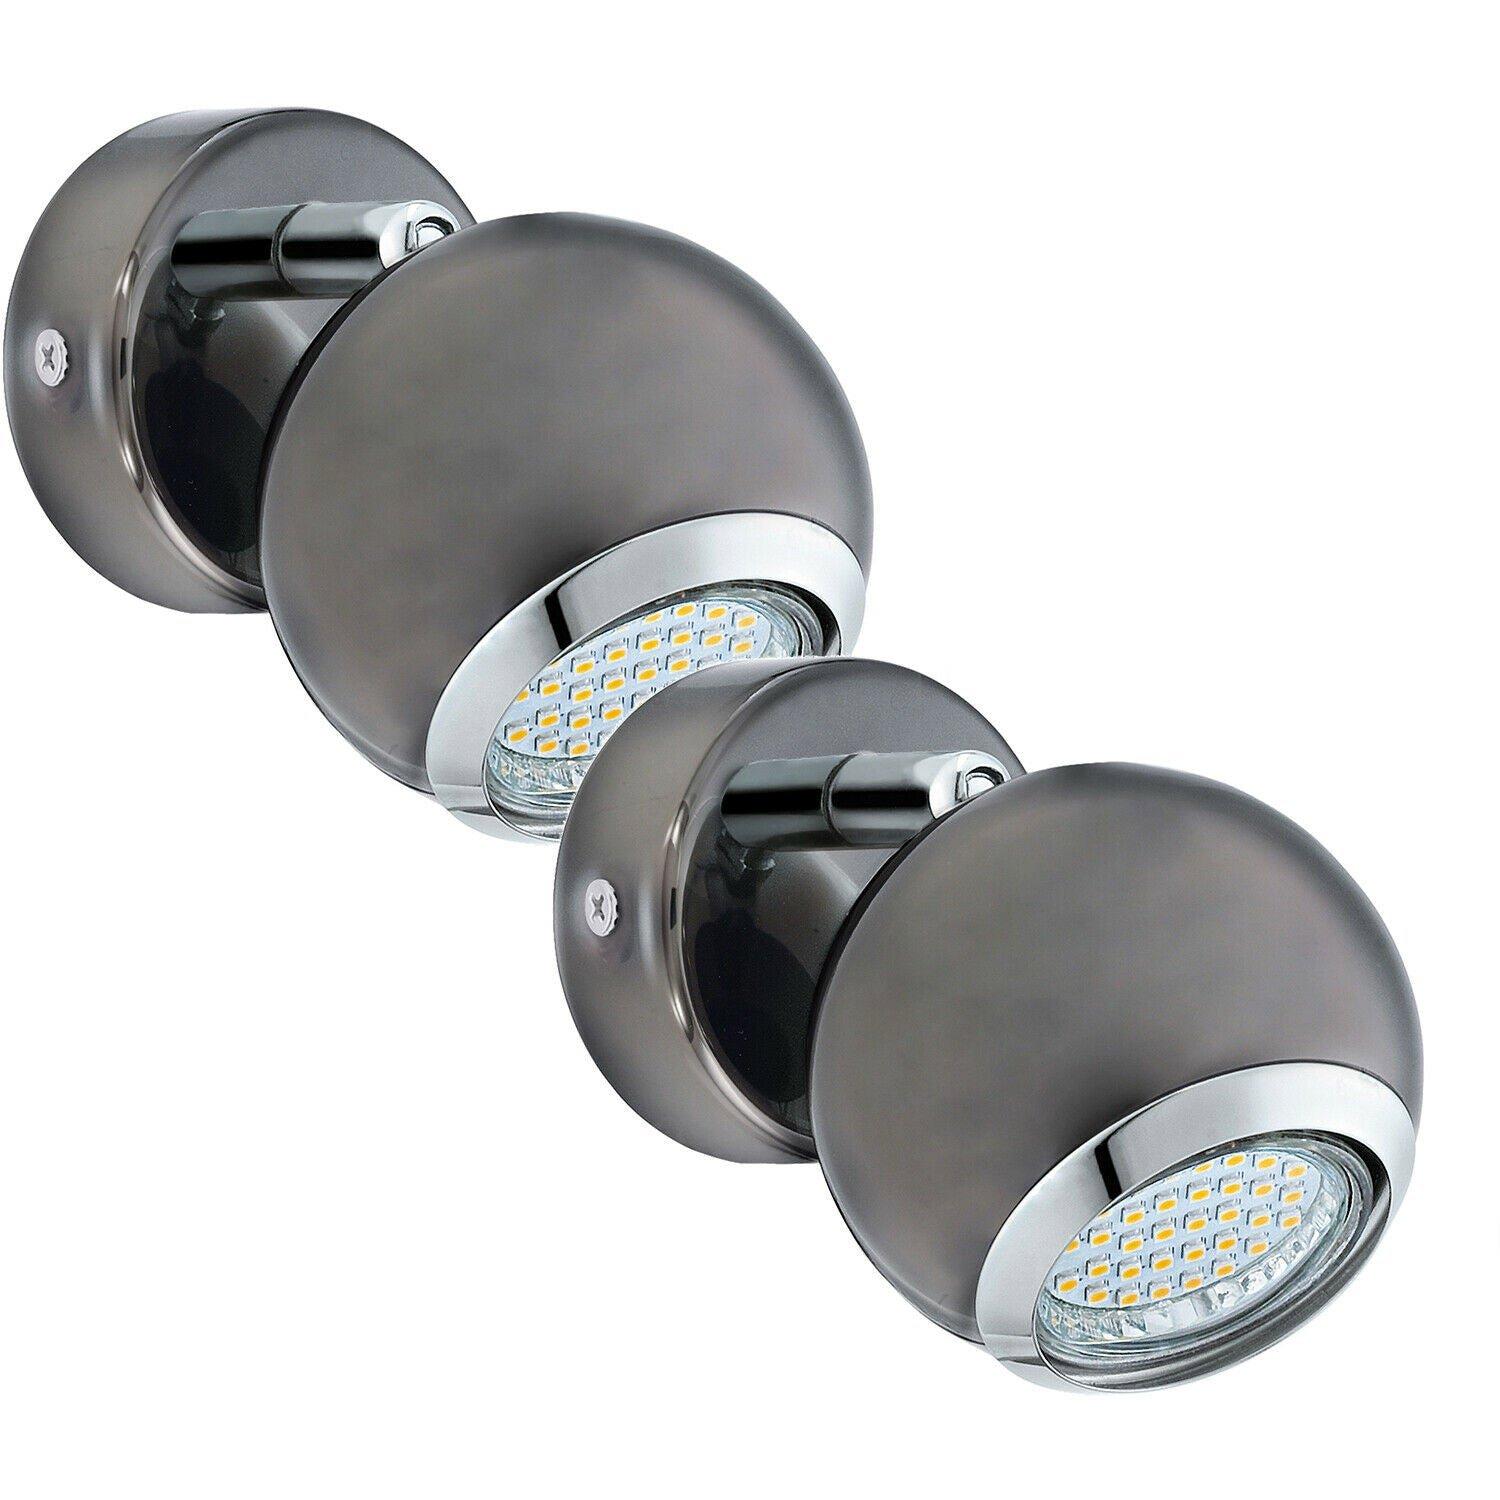 2 PACK Wall Spot Light Round Colour Nickel Chrome Shade GU10 1x3W Included